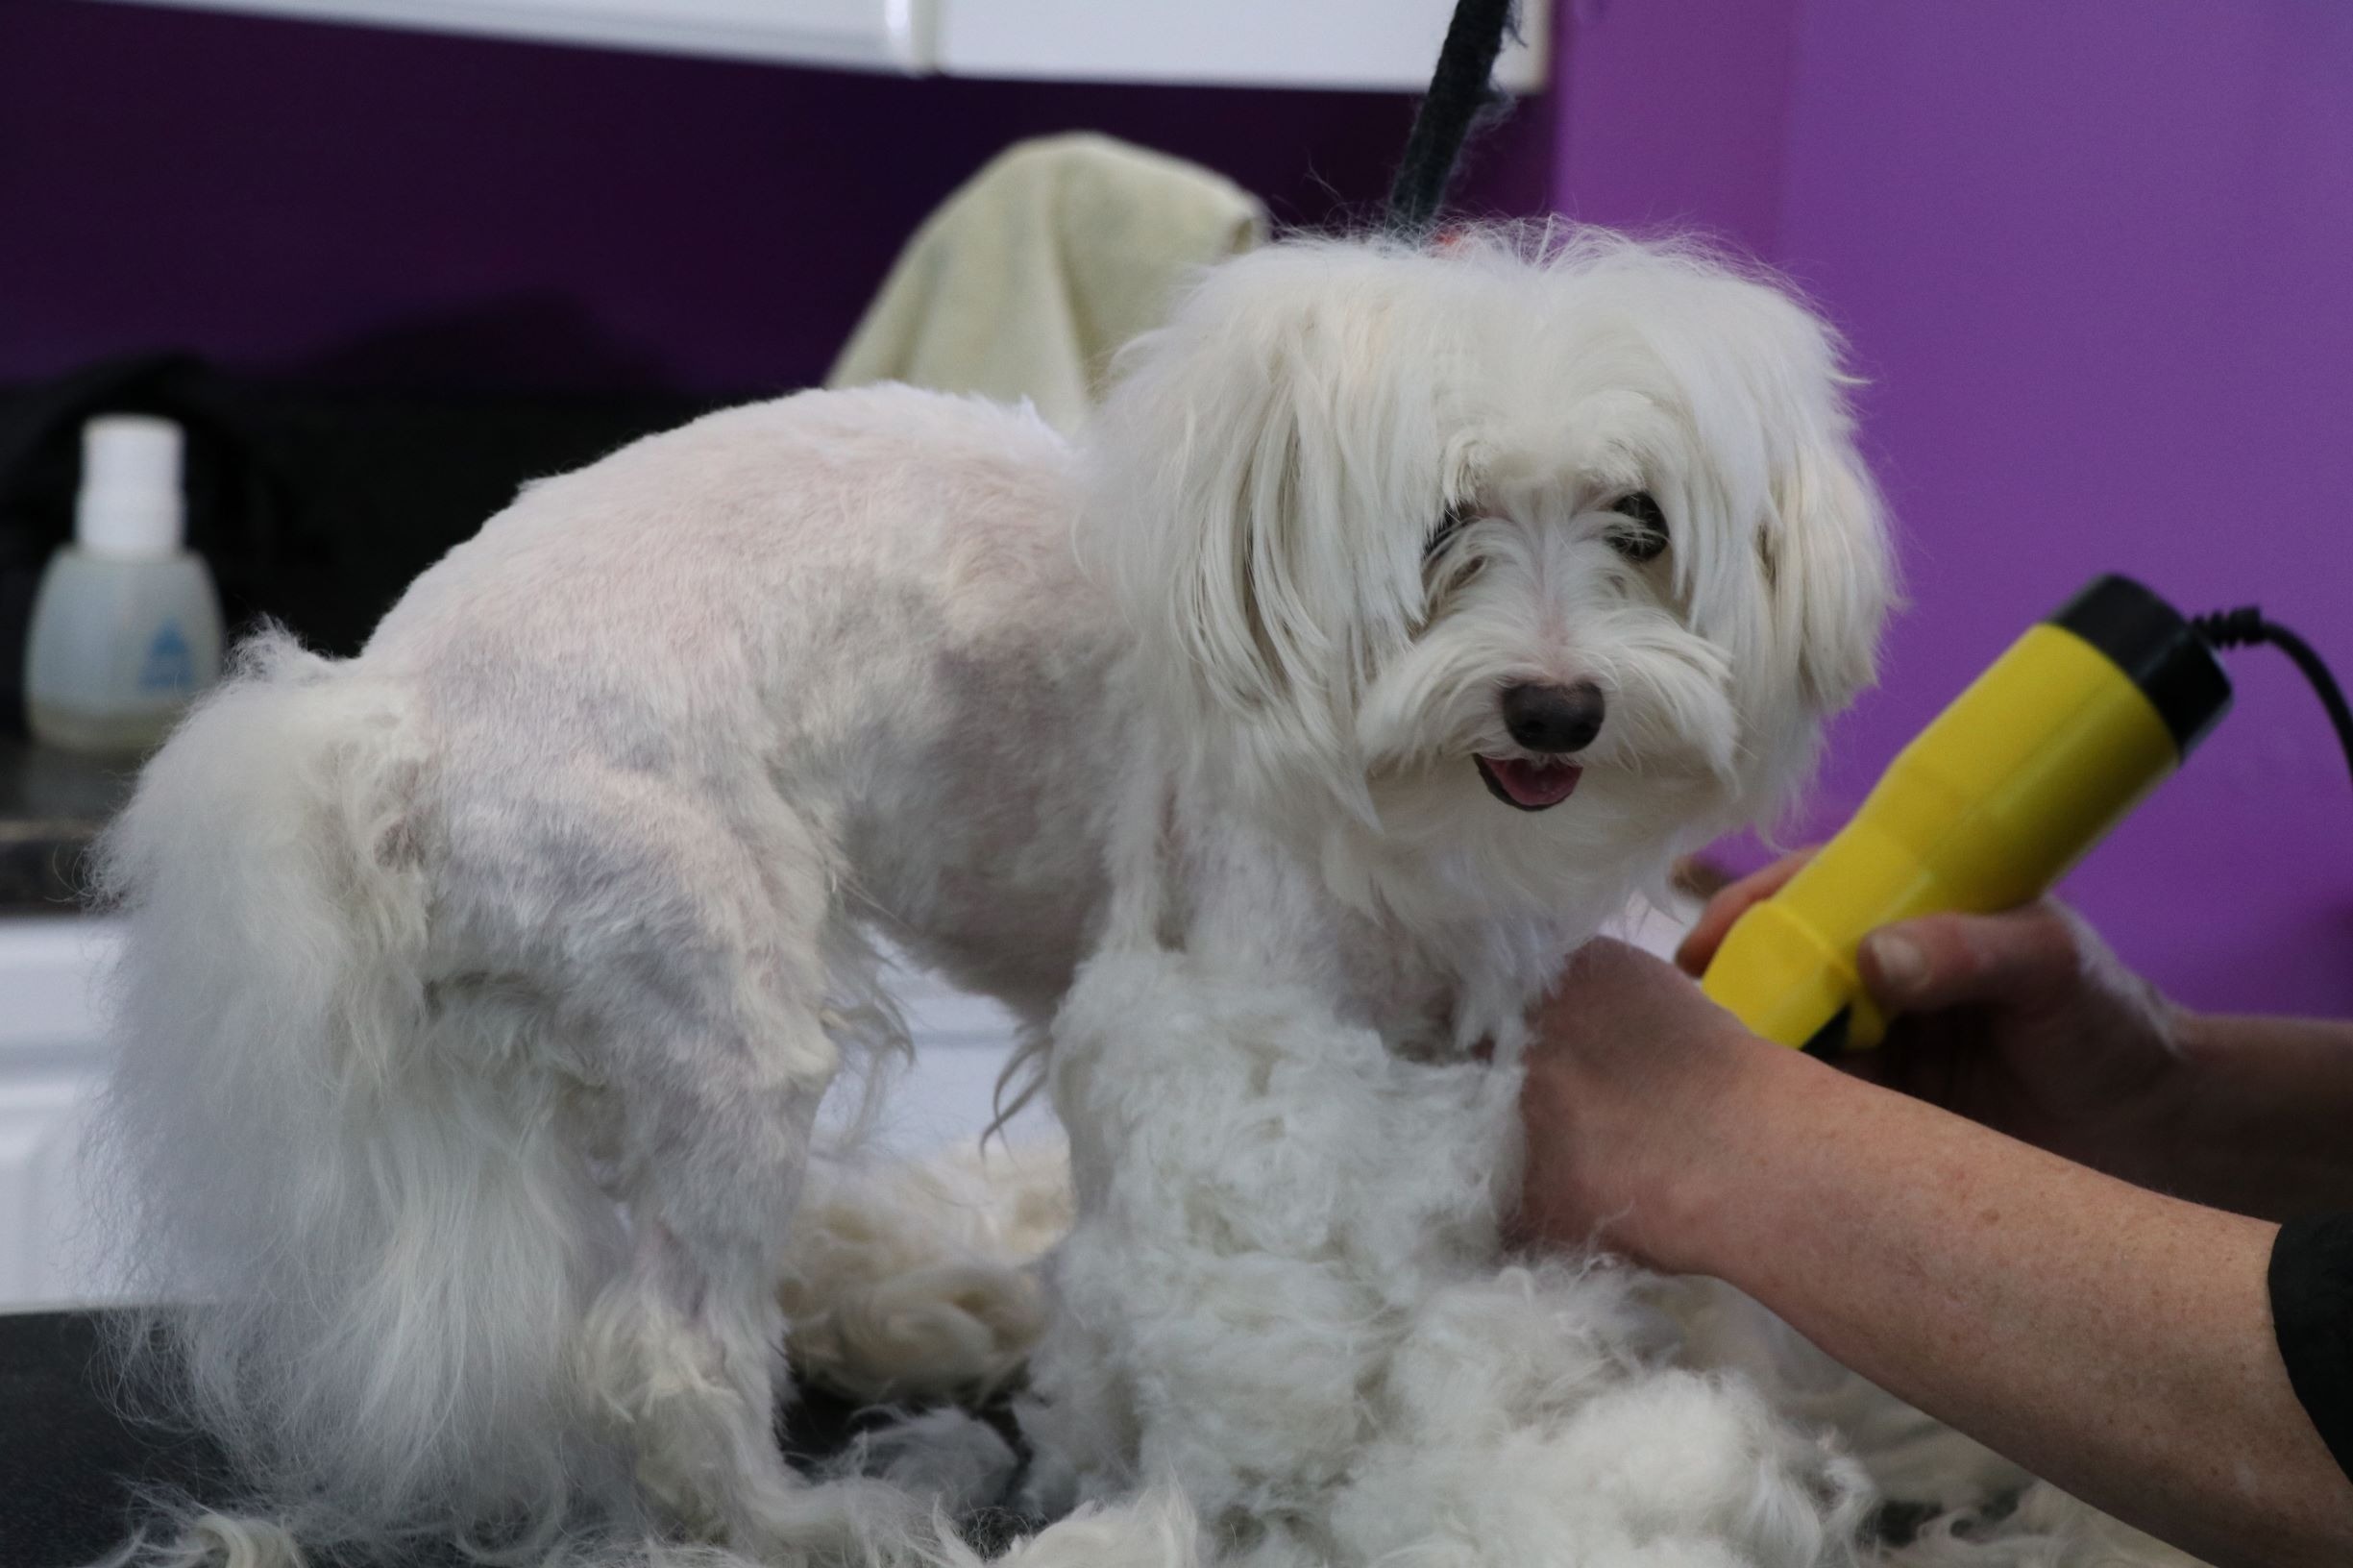 <img src="grooming.jpg" alt="The DOGfather Mobile Pet Grooming Services">